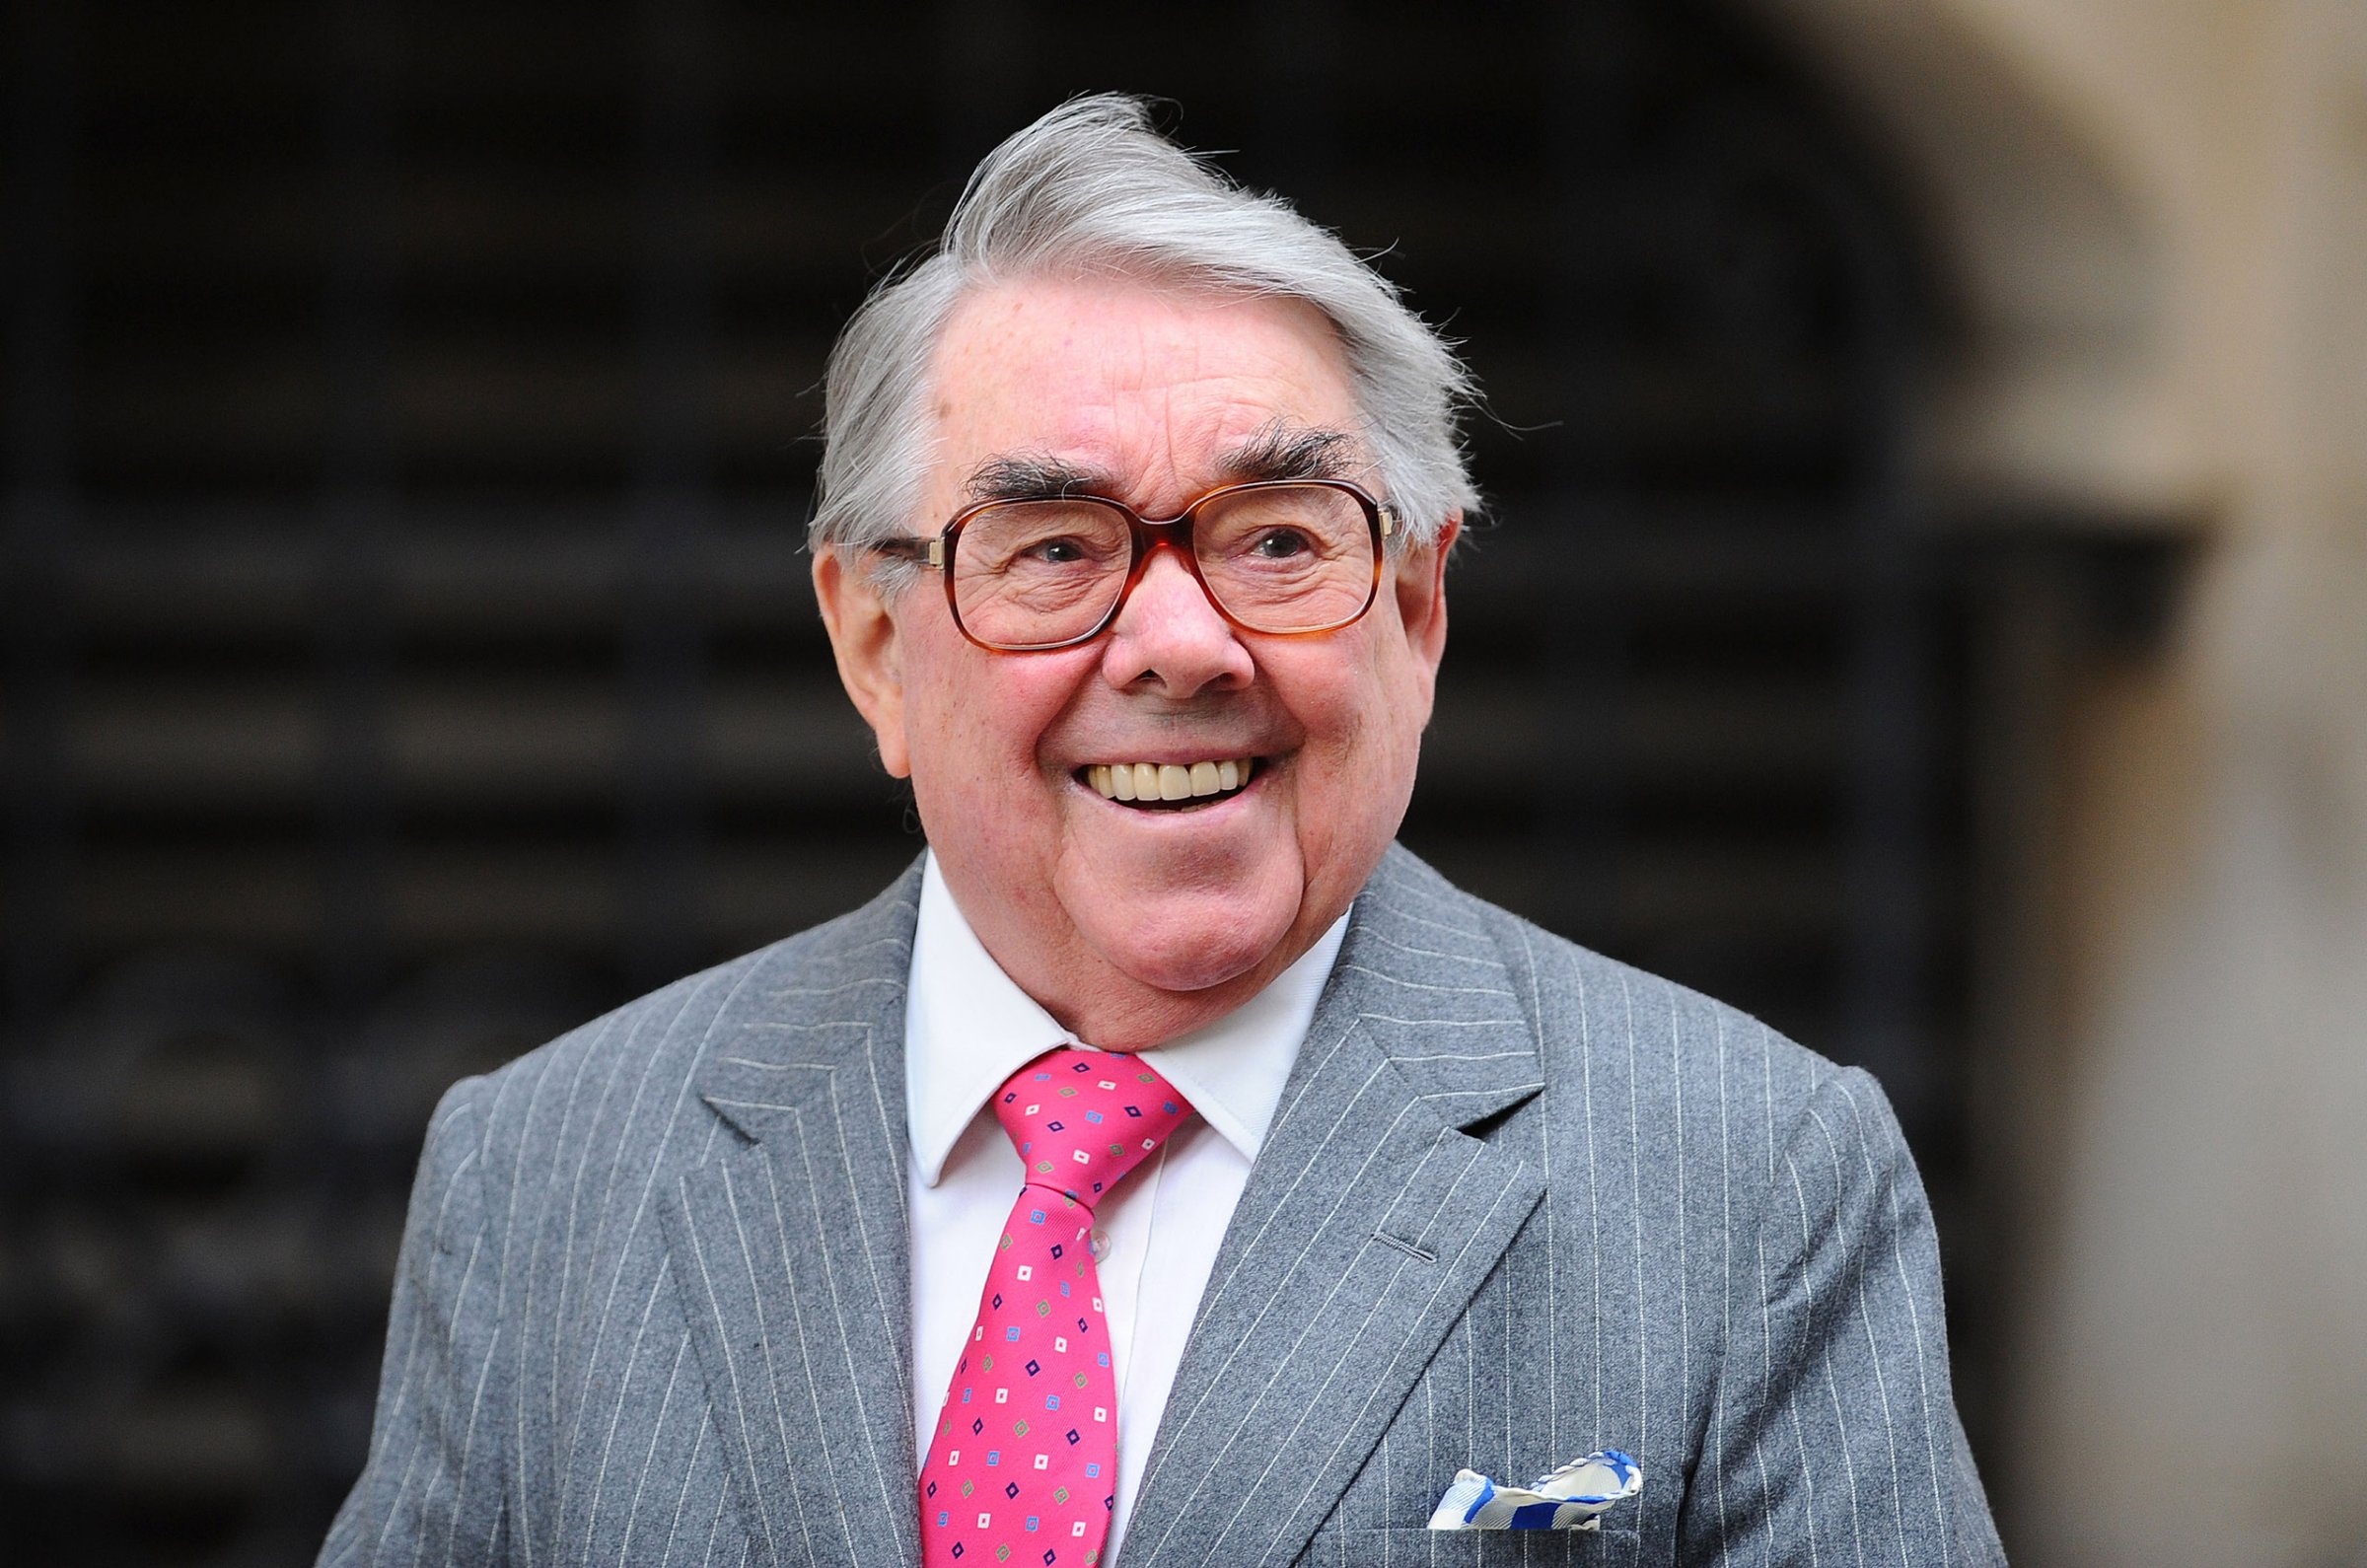 Ronnie Corbett attends a reception for the Best of Britain's Creative Industries at The Foreign Office in London, June 30, 2014.